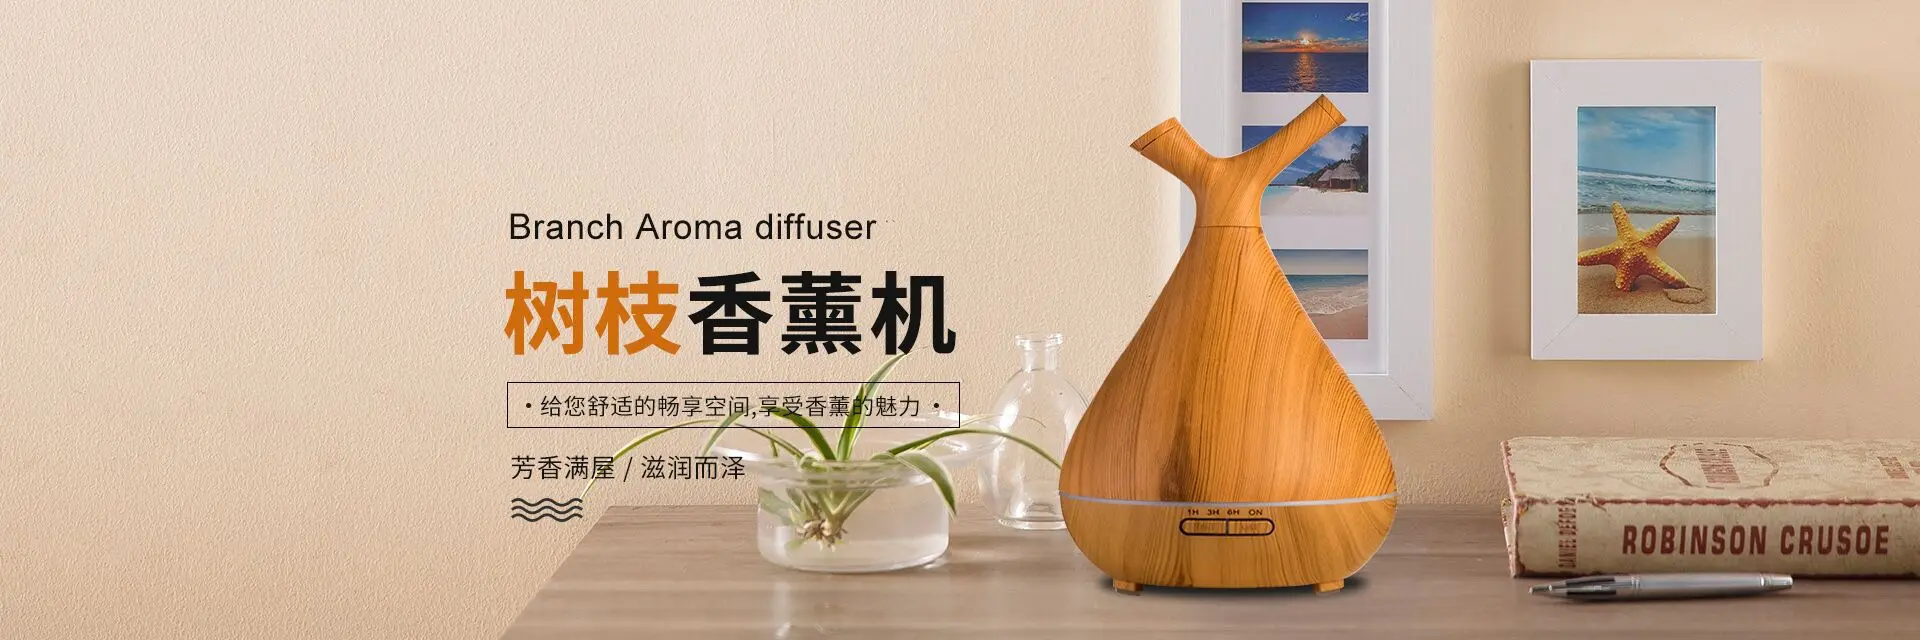 New Style Creative Branch Wood Grain Aroma Diffuser Mini Air Purification Expansion Incense Smart Humidifier Household Large Cap